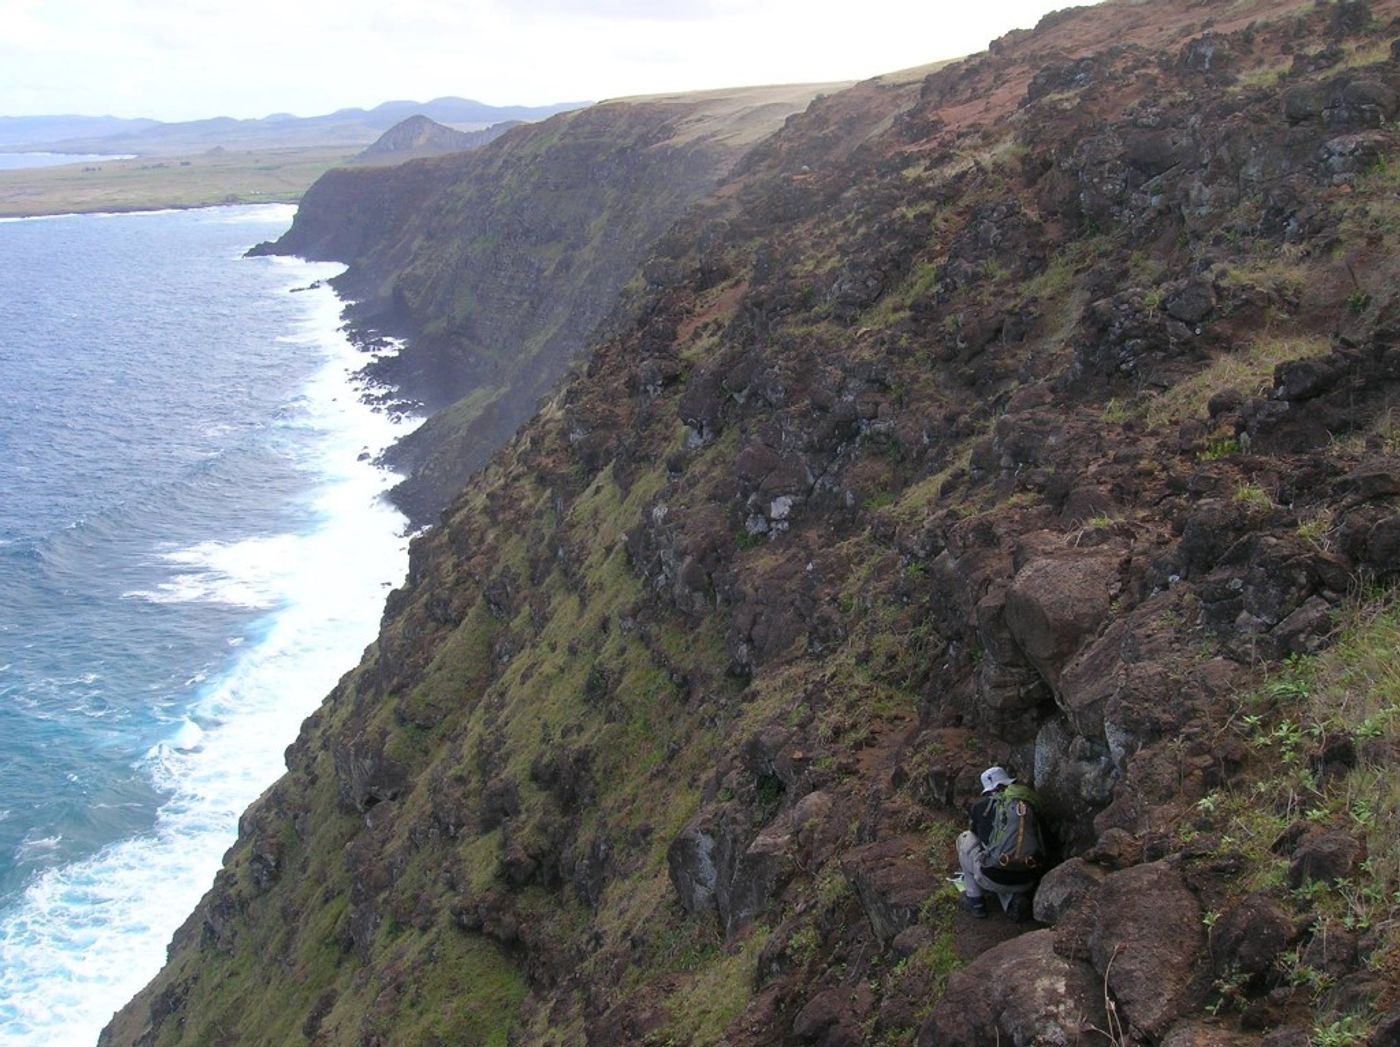 Searching cliff faces for native insects along the southern coast of Poike Volcano. (Credit: Rafael Rodriguez Brizuela)